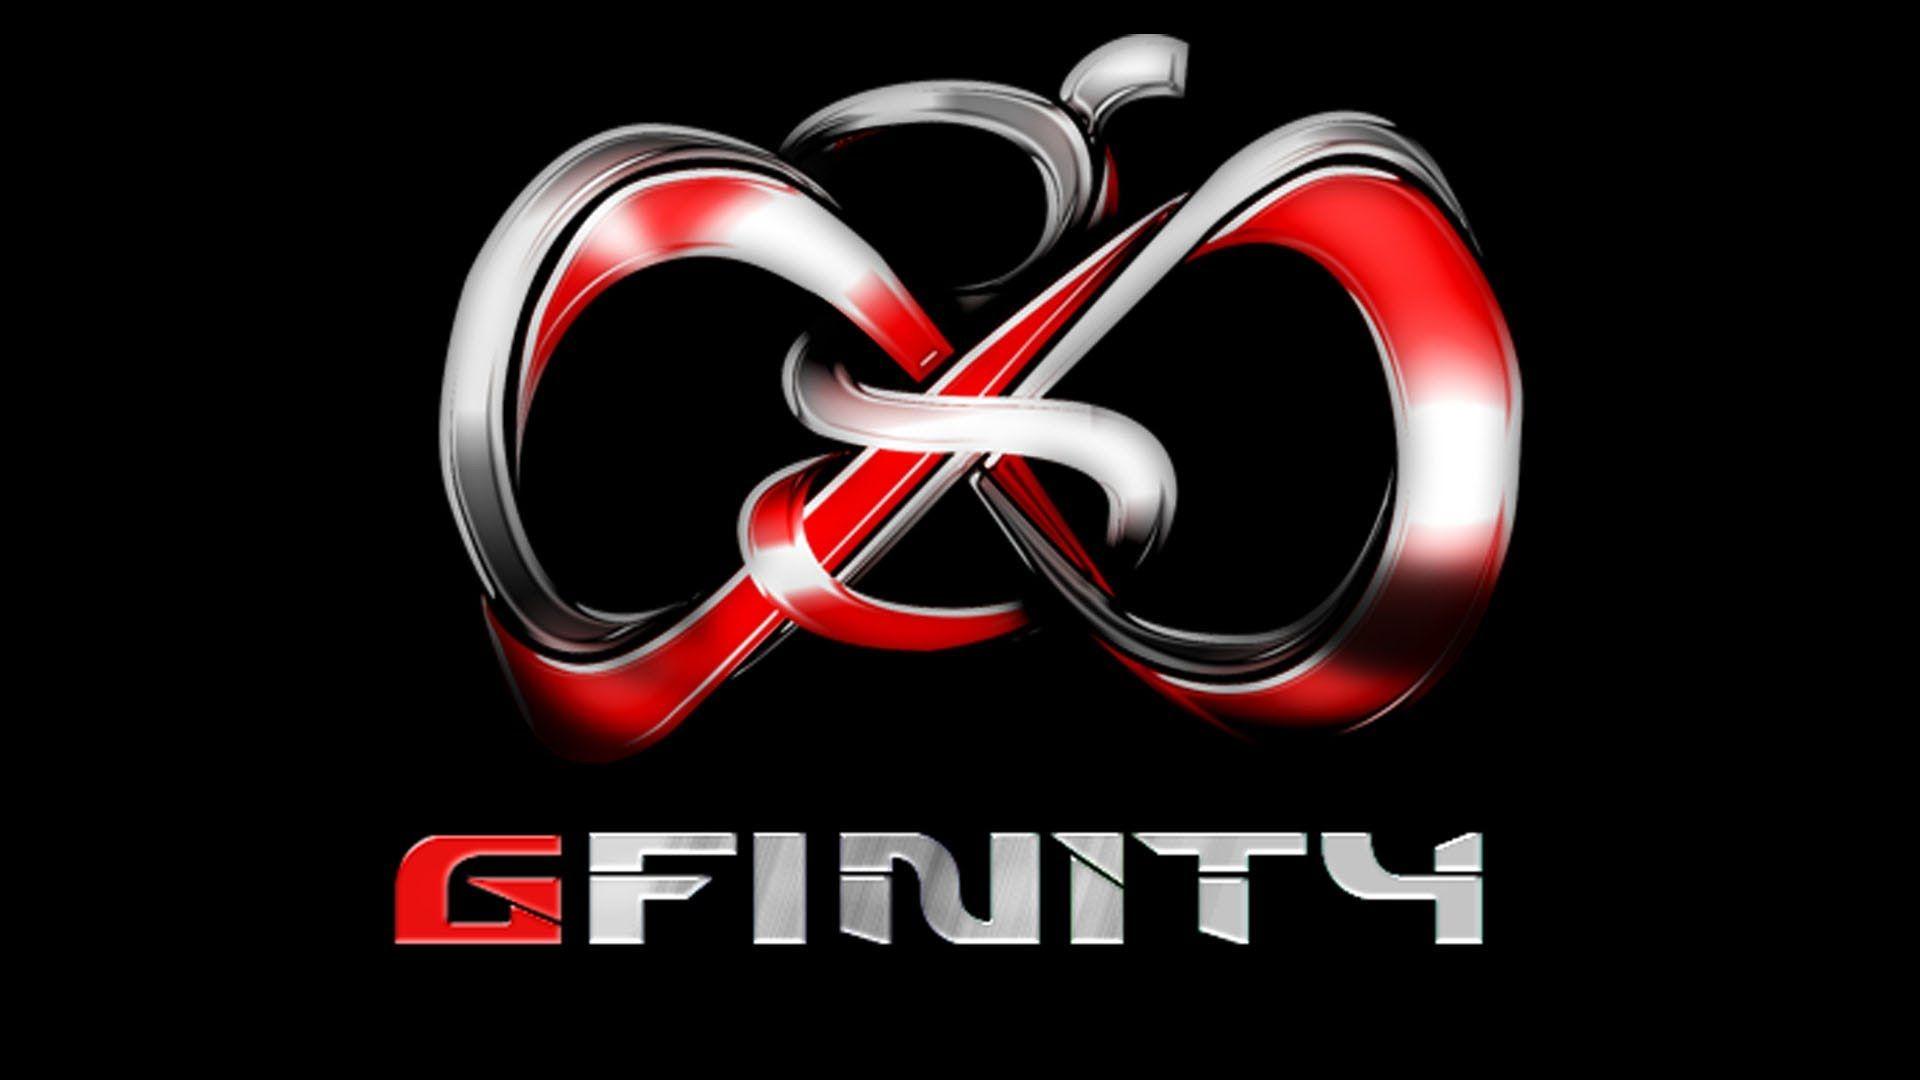 Gfinity Logo - Gfinity 3 Call of Duty: Ghosts Results